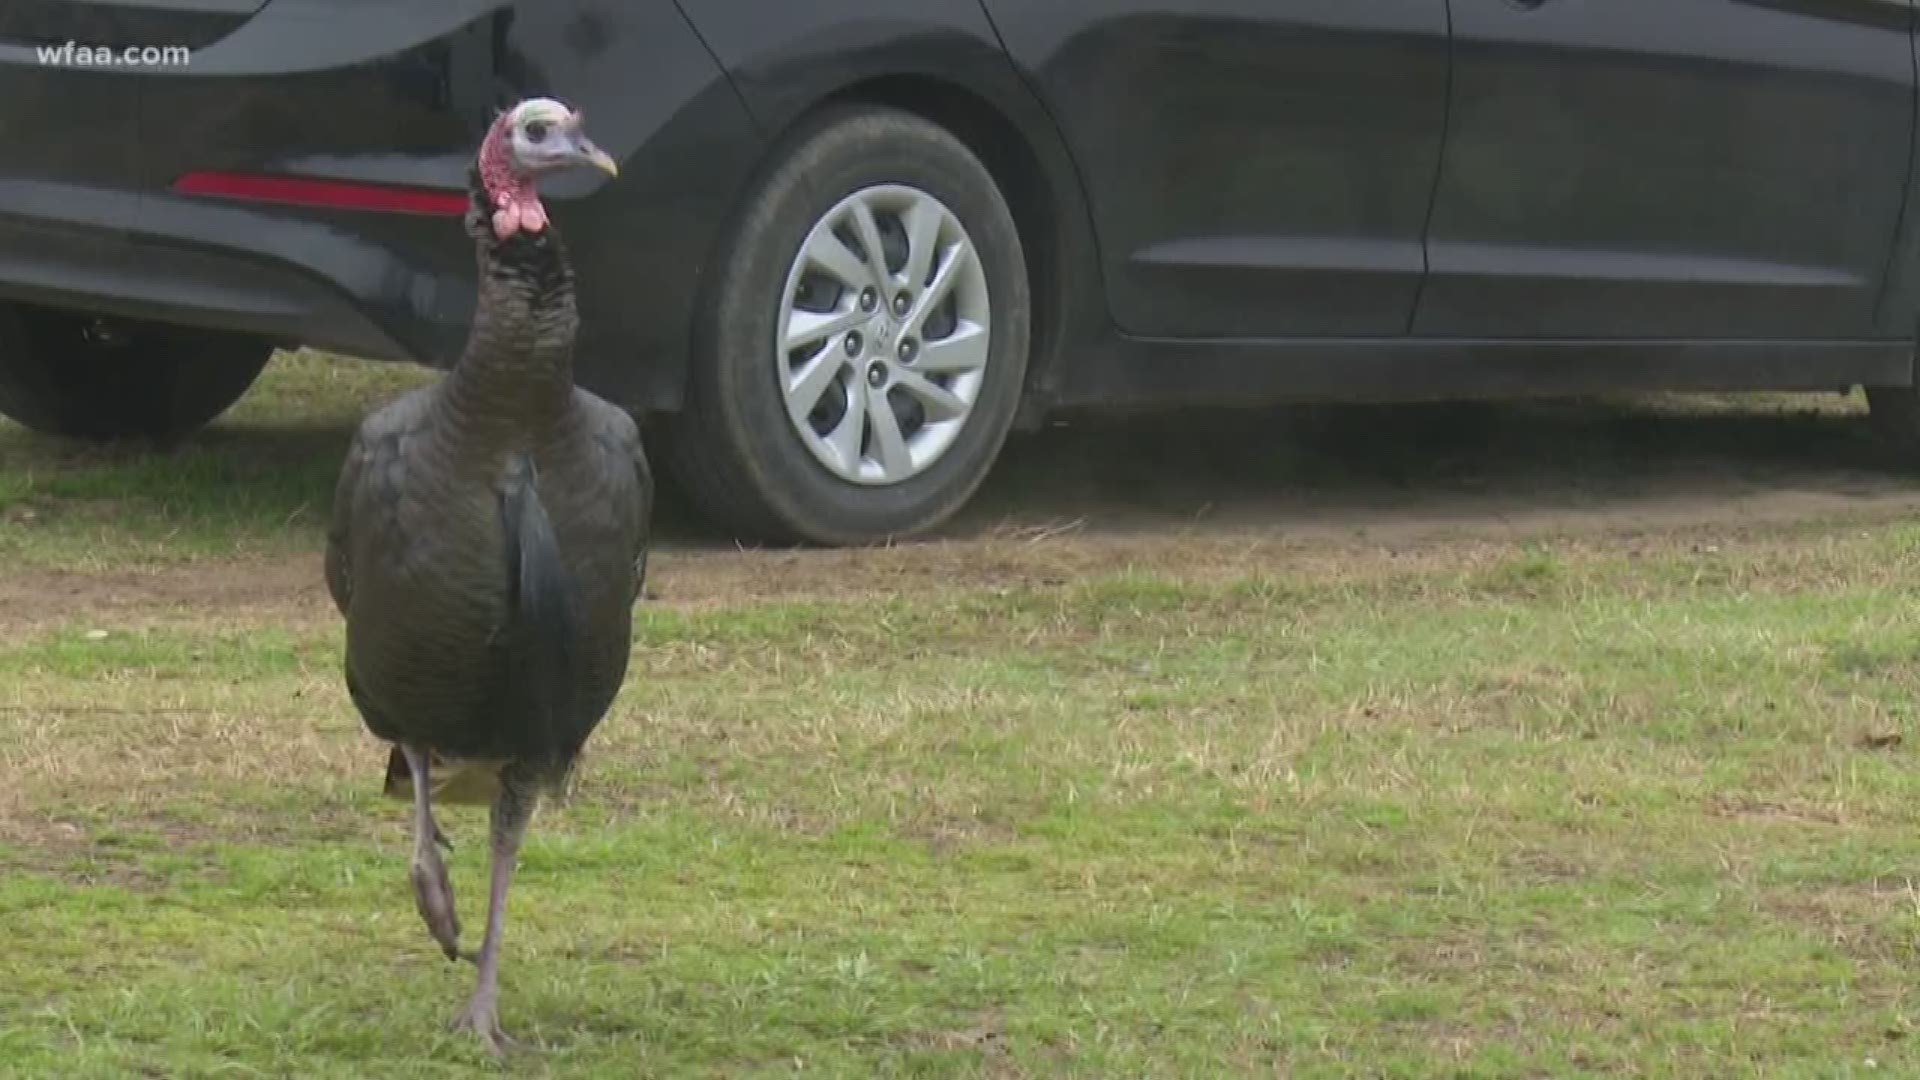 Fowl play? Argyle's famous outlaw trots into traffic problems